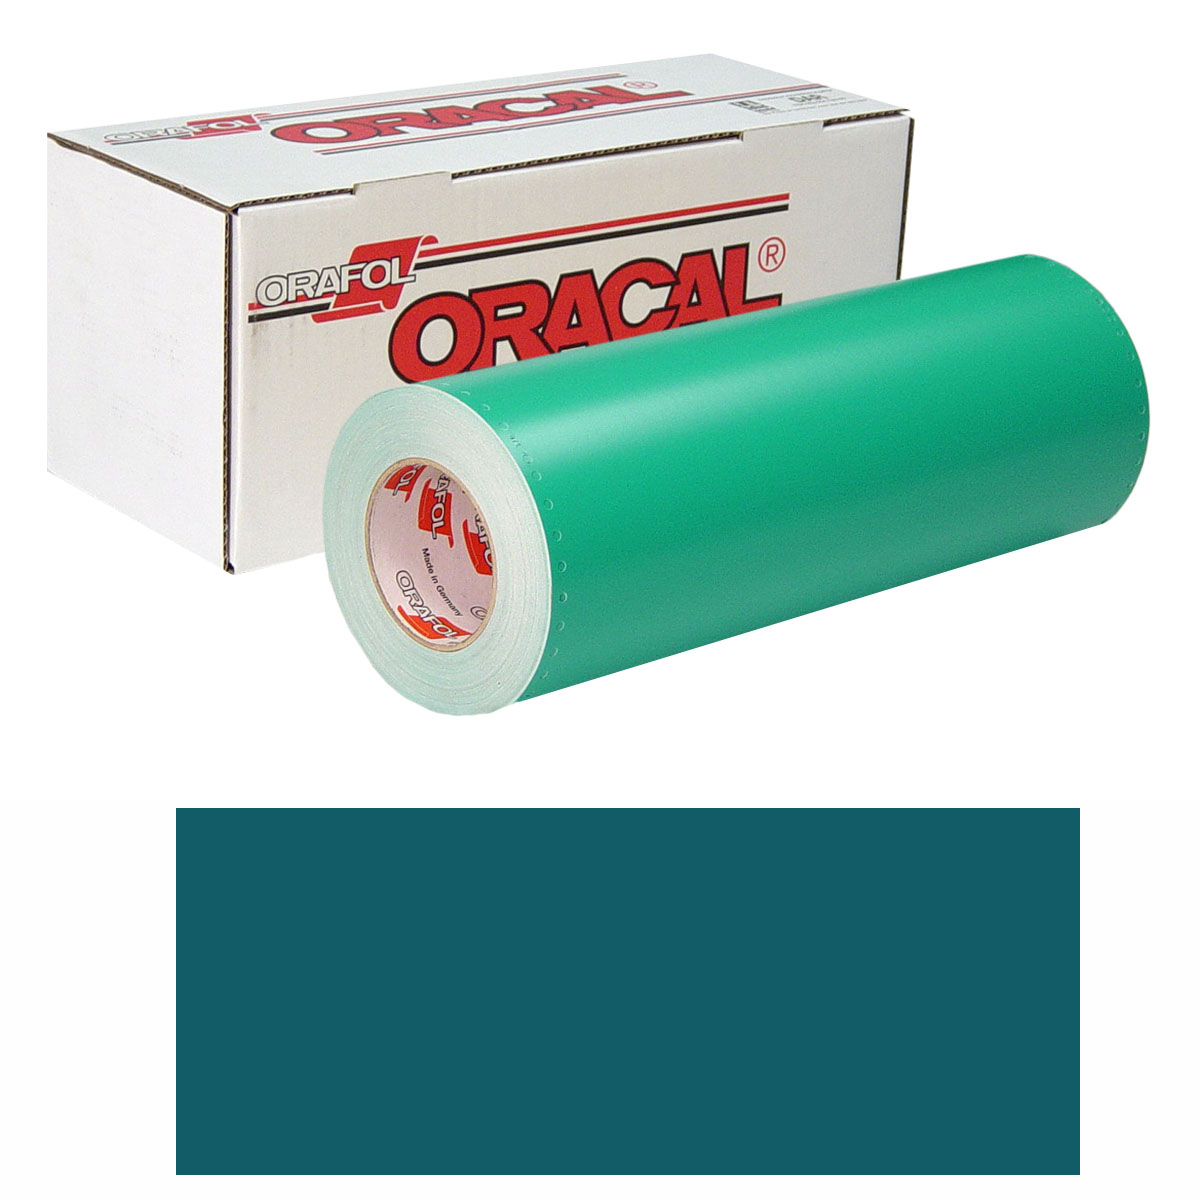 ORACAL 8500 30in X 50yd 541 Dark Turquoise